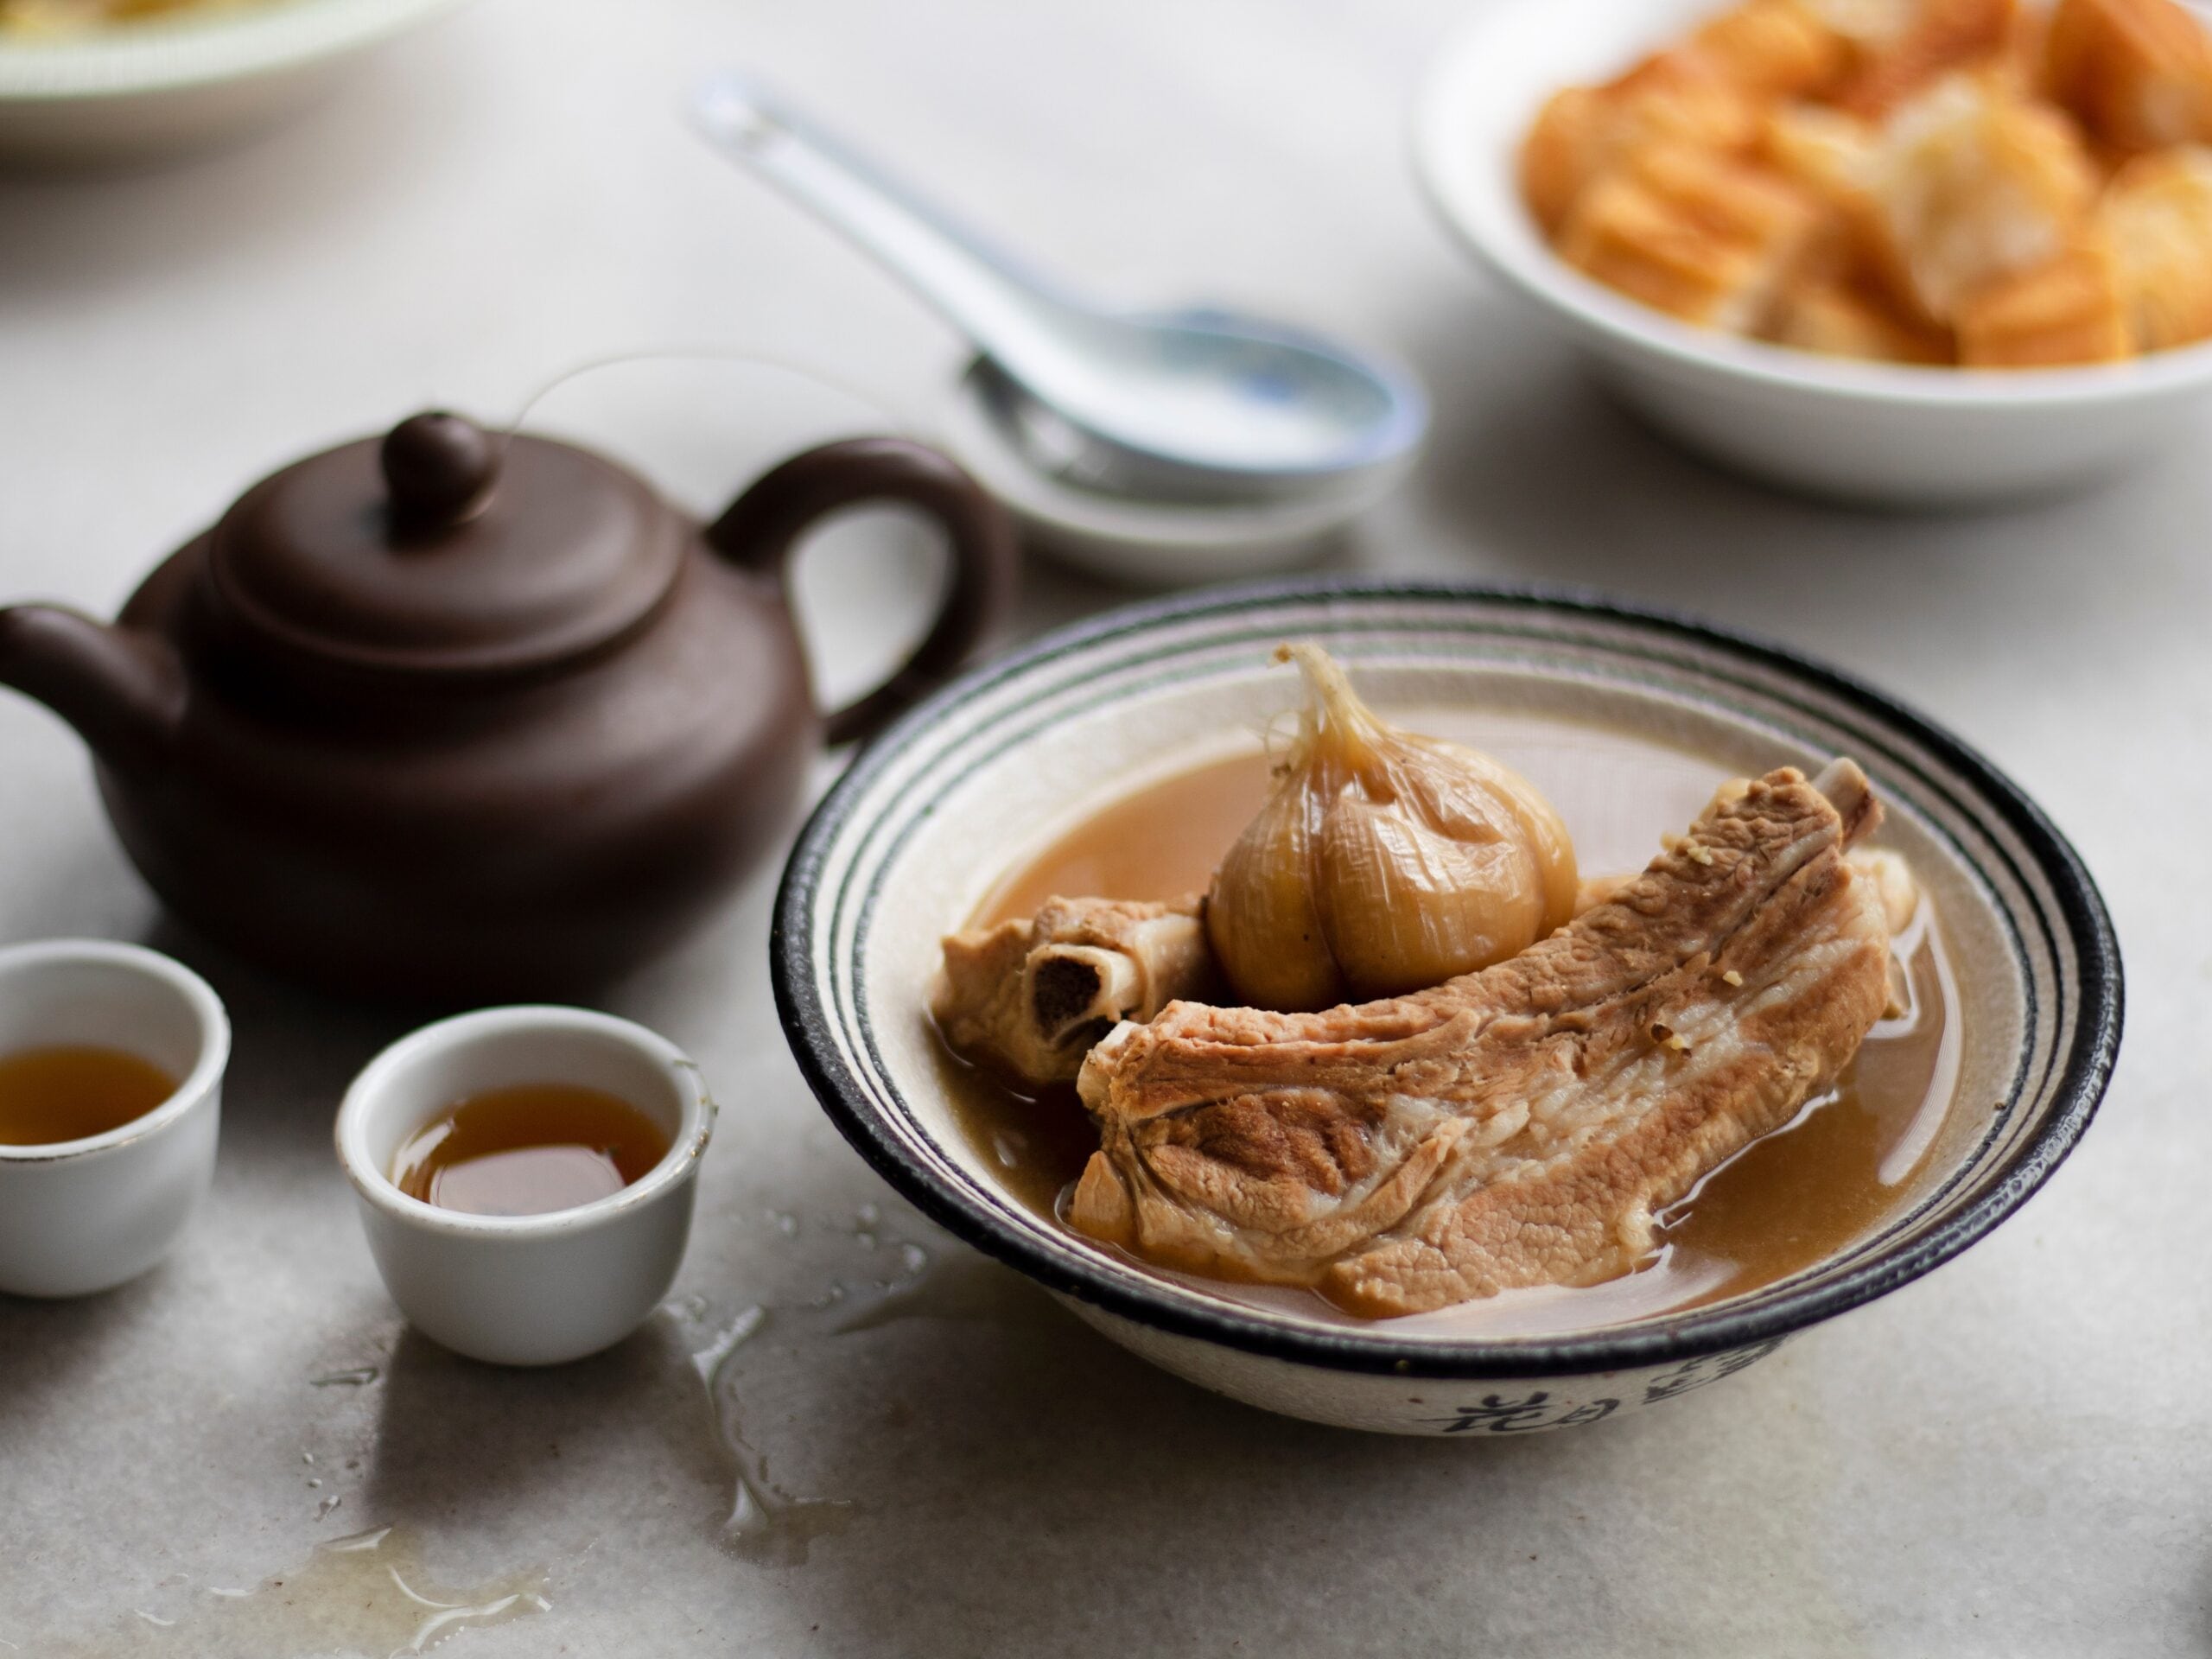 One of the most well-known dishes is ‘Bak Kut The’. What does it mean? 